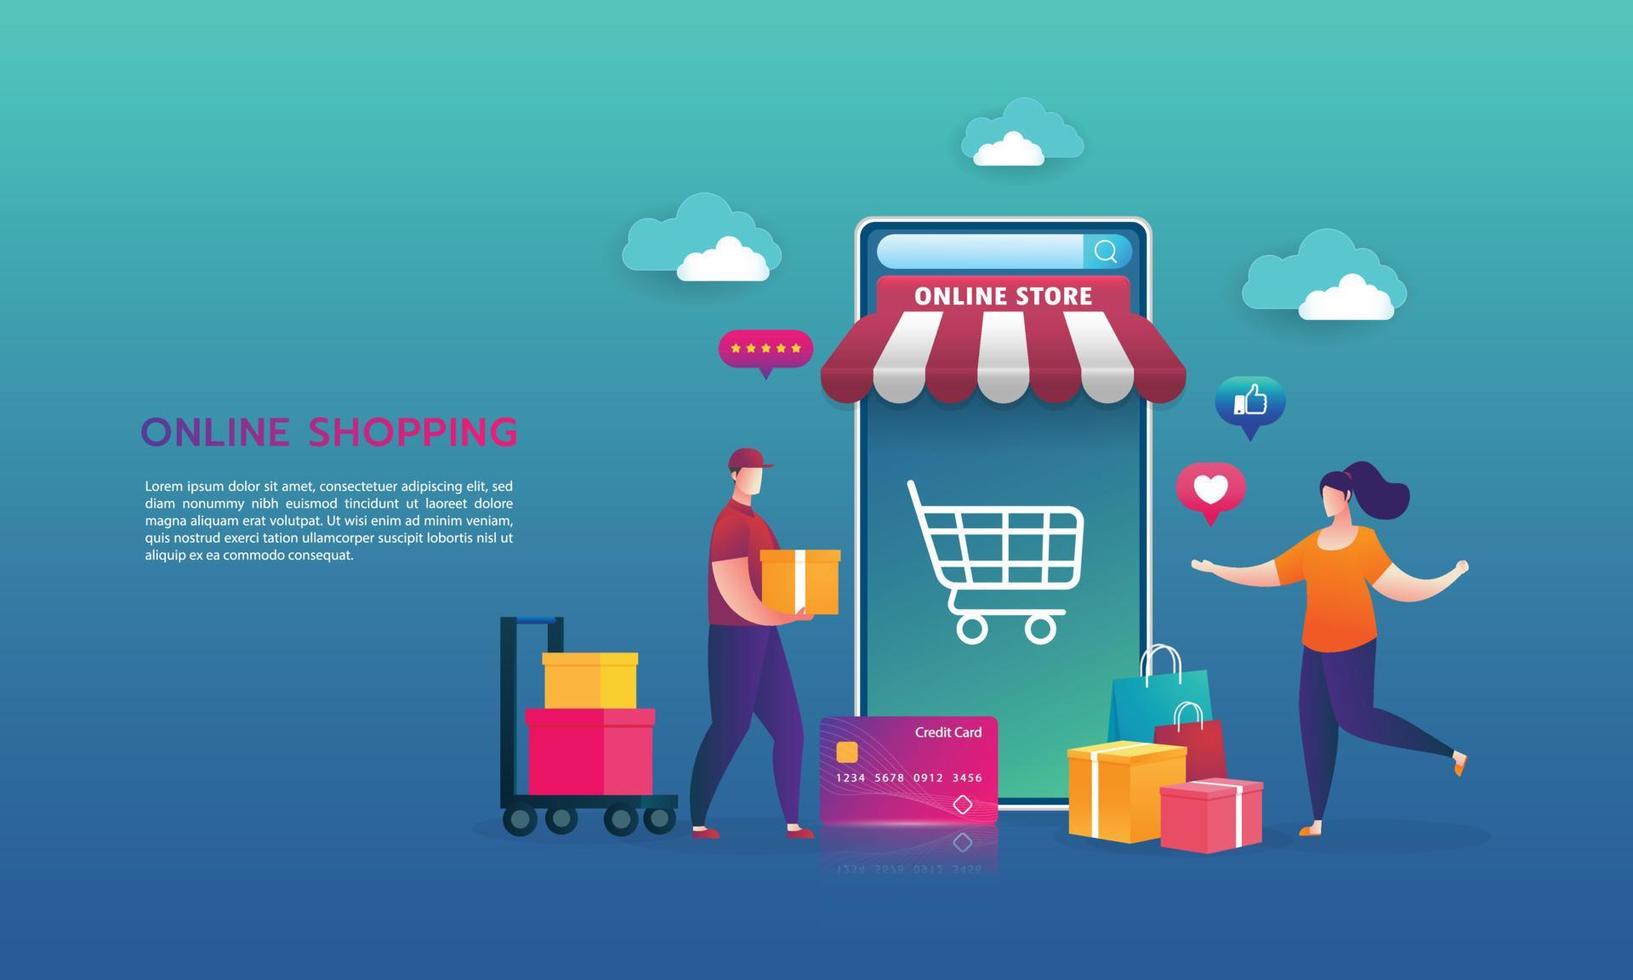 Online shopping on website E-commerce or mobile phone applications vector concepts and digital marketing. The woman is shopping on mobile phone and the man is delivering.